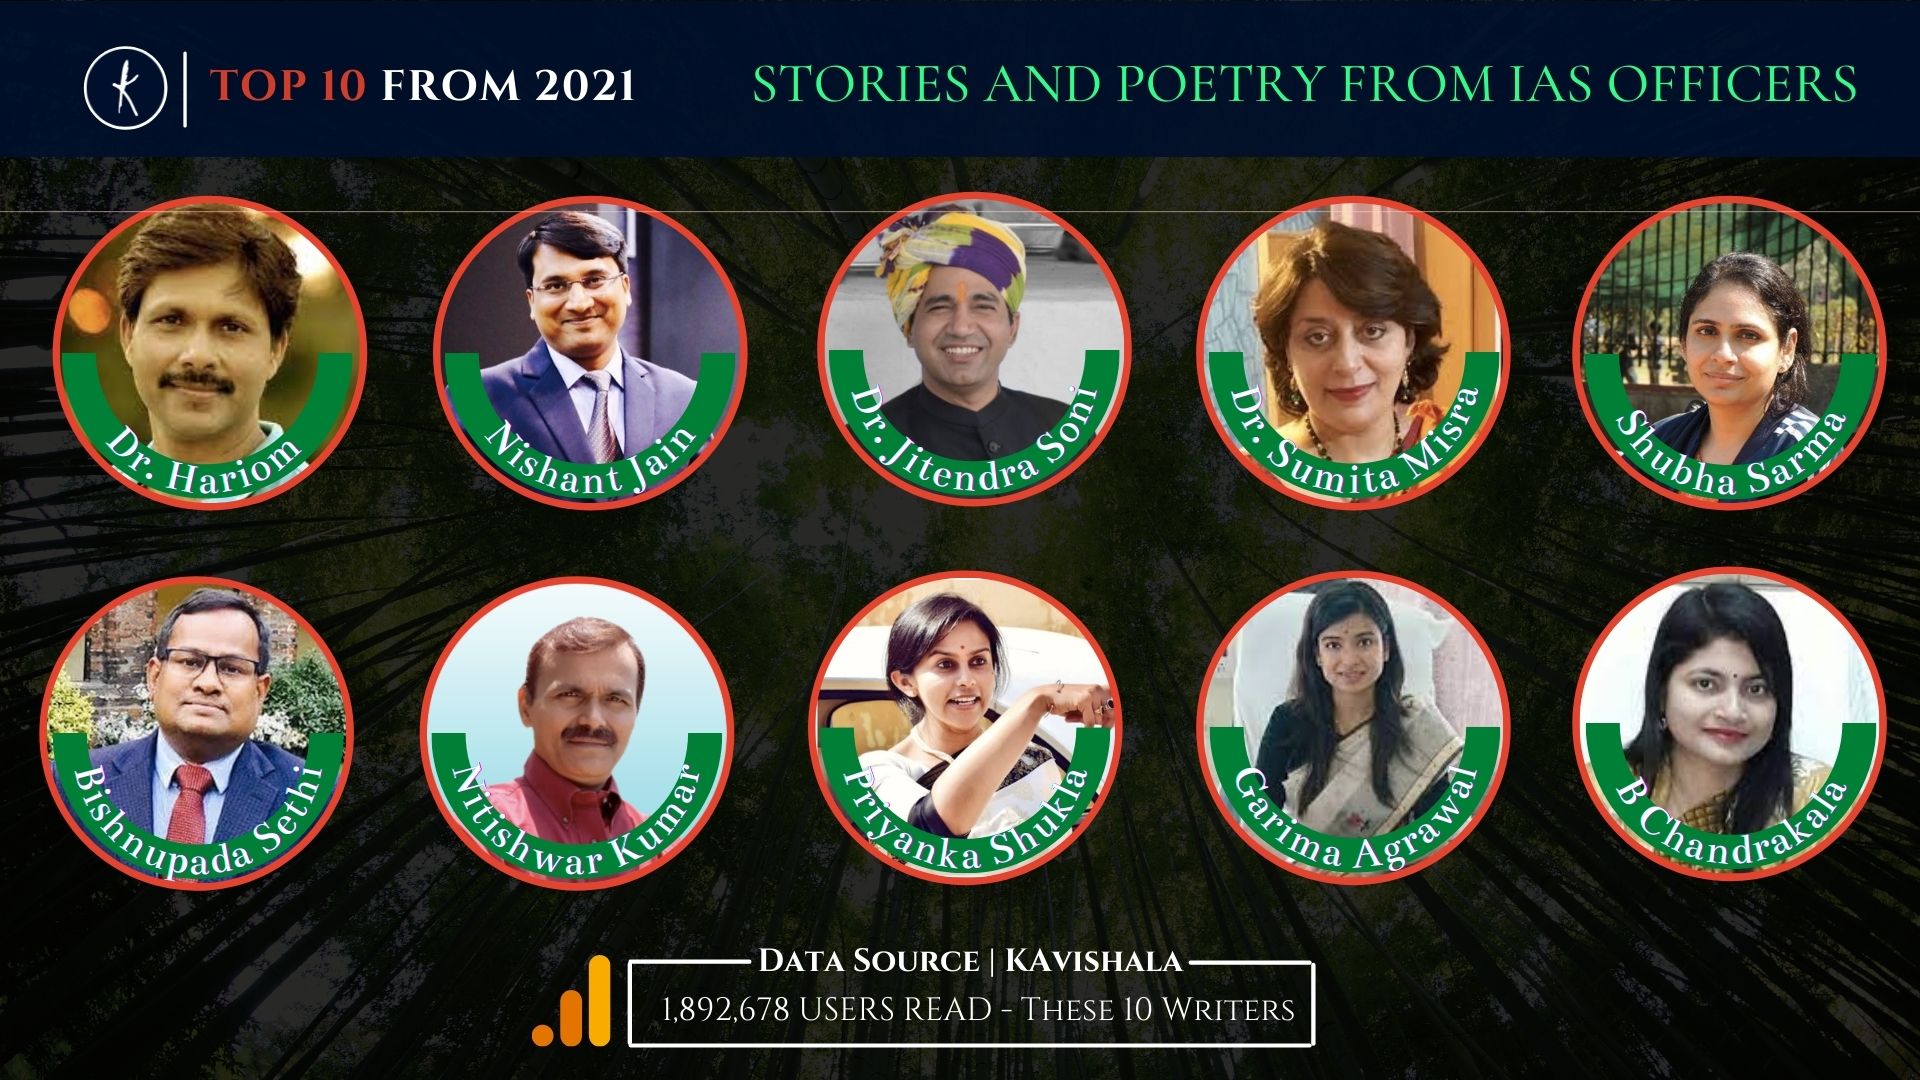 STORIES AND POETRY FROM IAS OFFICERS | Kavishala TOP 10 FROM 2021's image